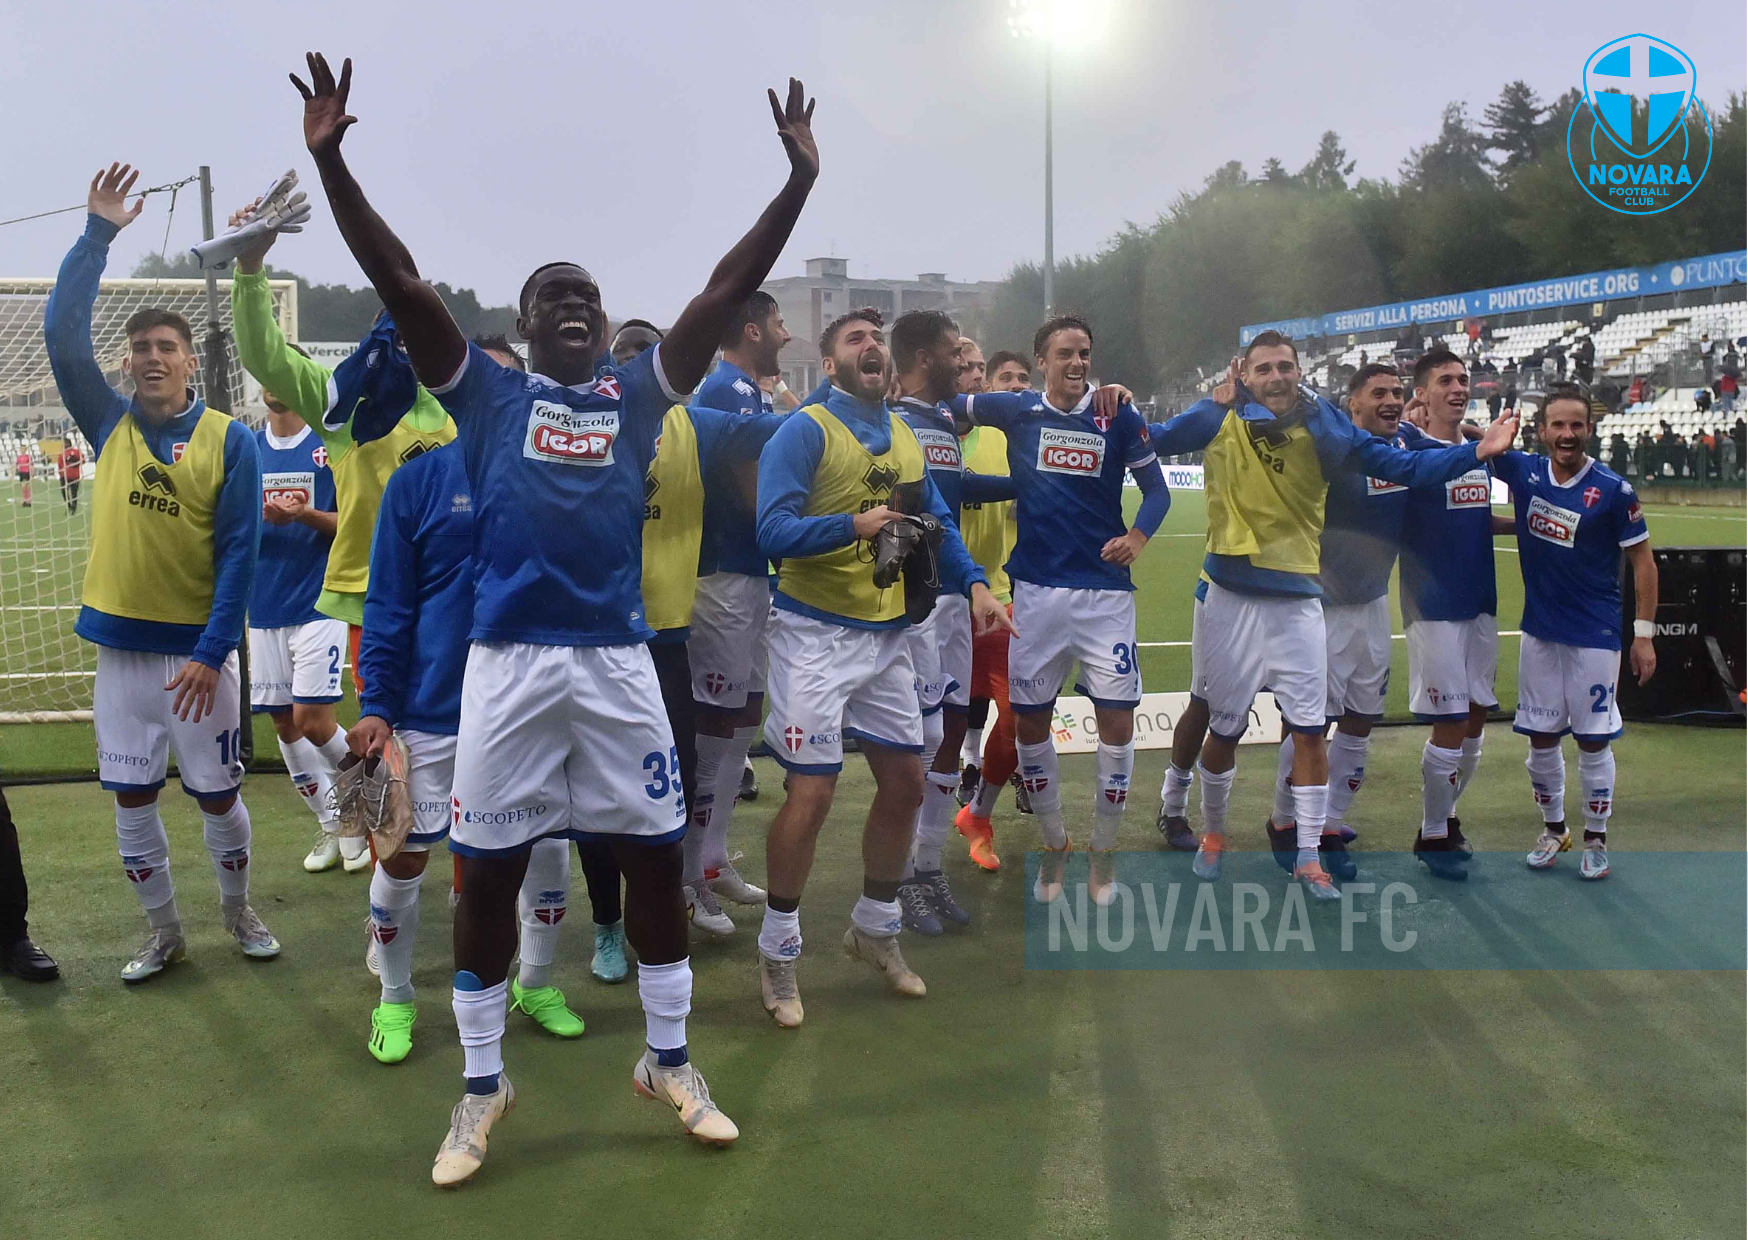 Read more about the article Pro Vercelli-Novara 1-2 | Gallery